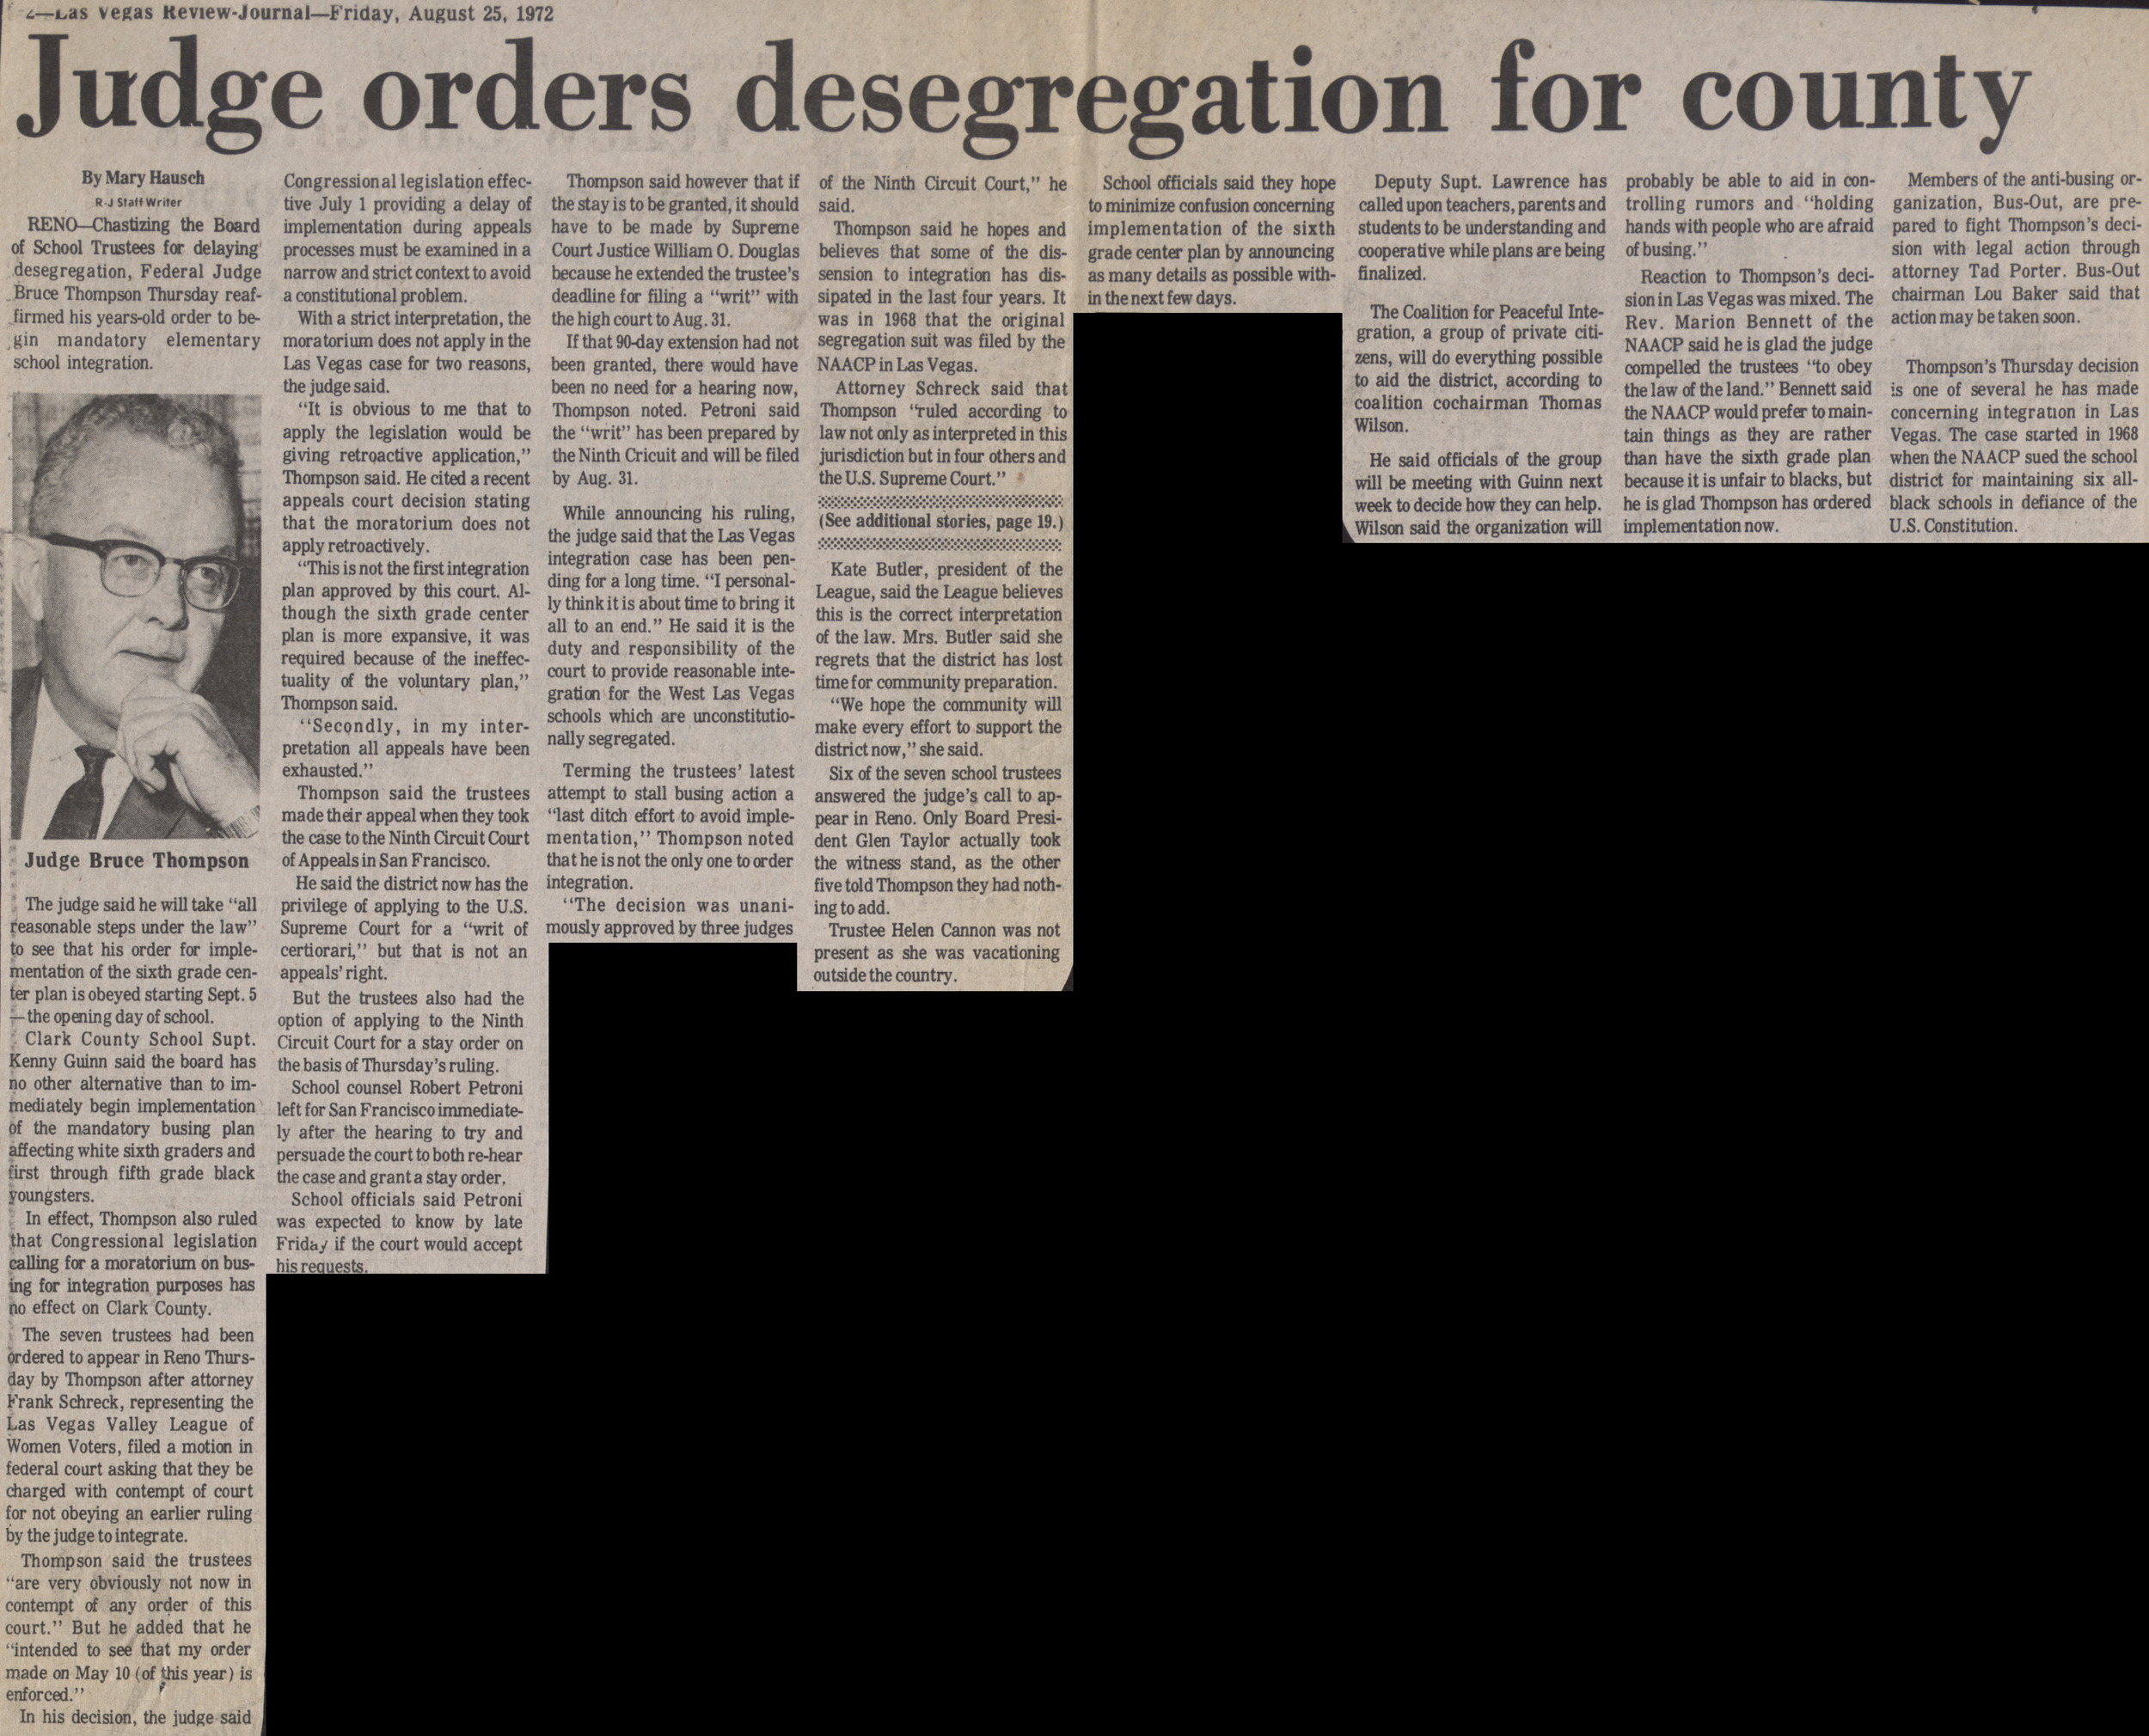 Newspaper clipping, Judge orders desegregation for county, Las Vegas Review-Journal, August 25, 1972